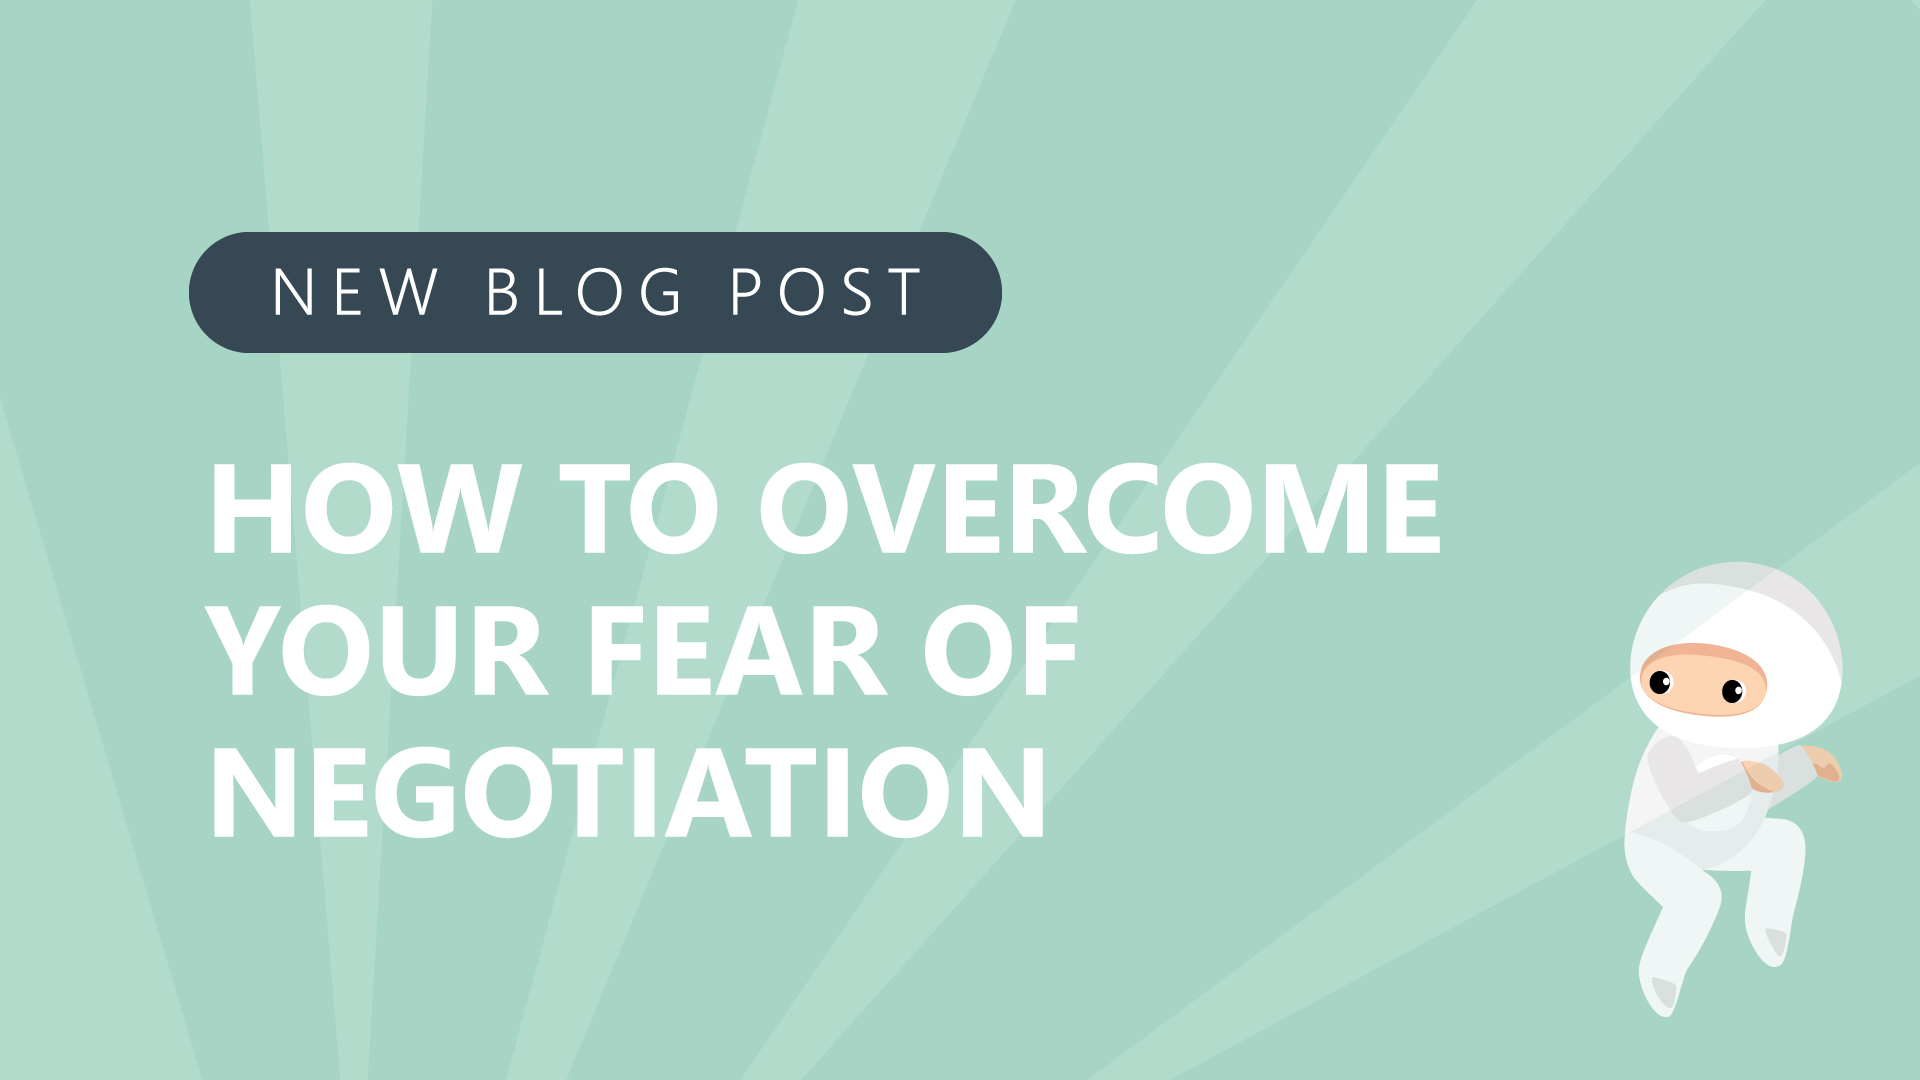 17-How-to-Overcome-Your-Fear-of-Negotiation.jpg